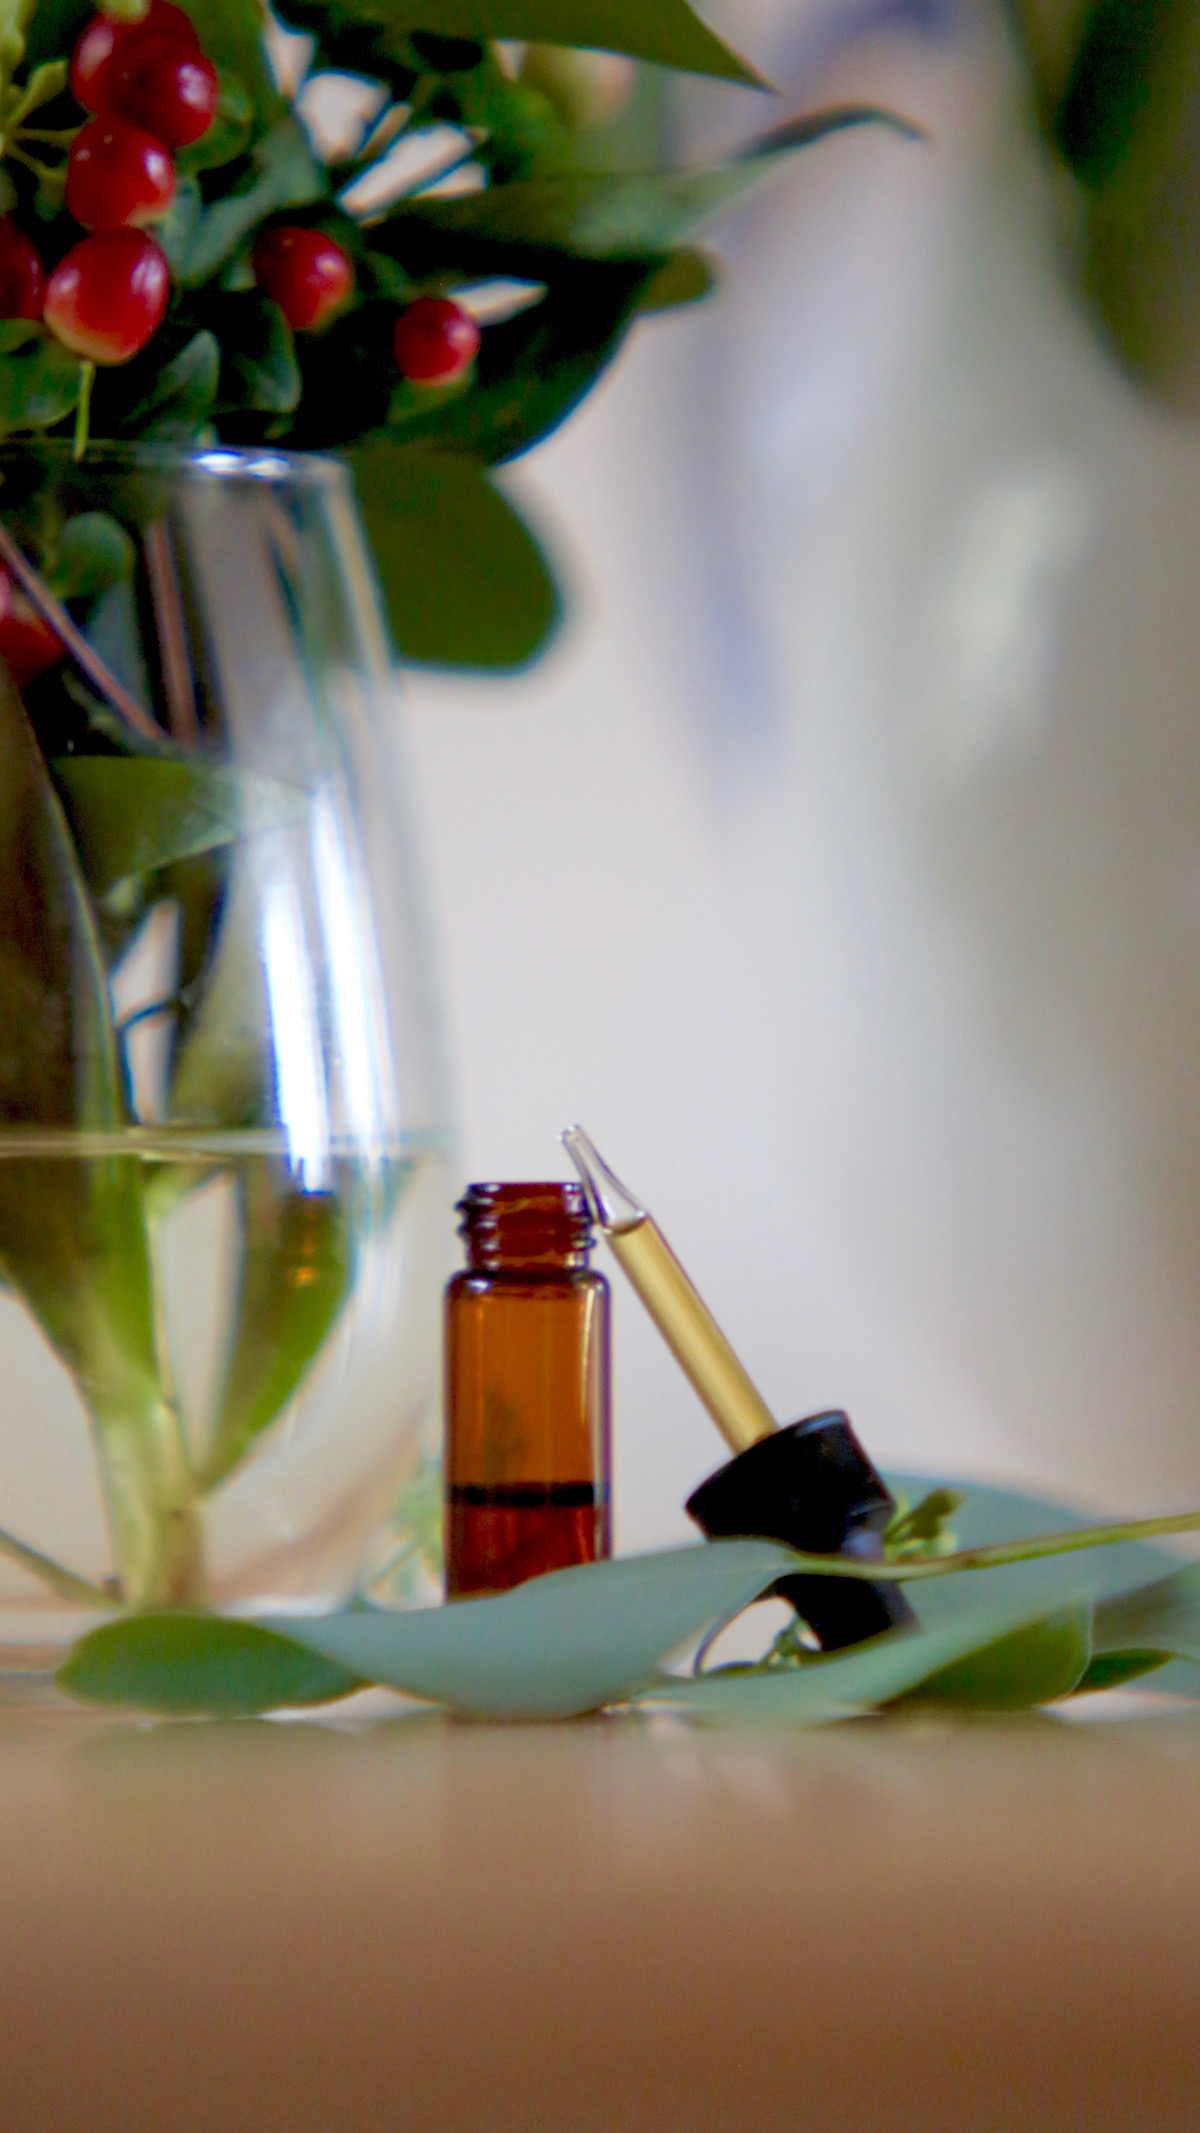 What Research Says About Essential Oils For Alzheimer’s and Dementia | Herbal Academy | Do you have a loved one that suffers from a neurodegenerative disease? Learn what research says about essential oils for Alzheimer's and dementia.